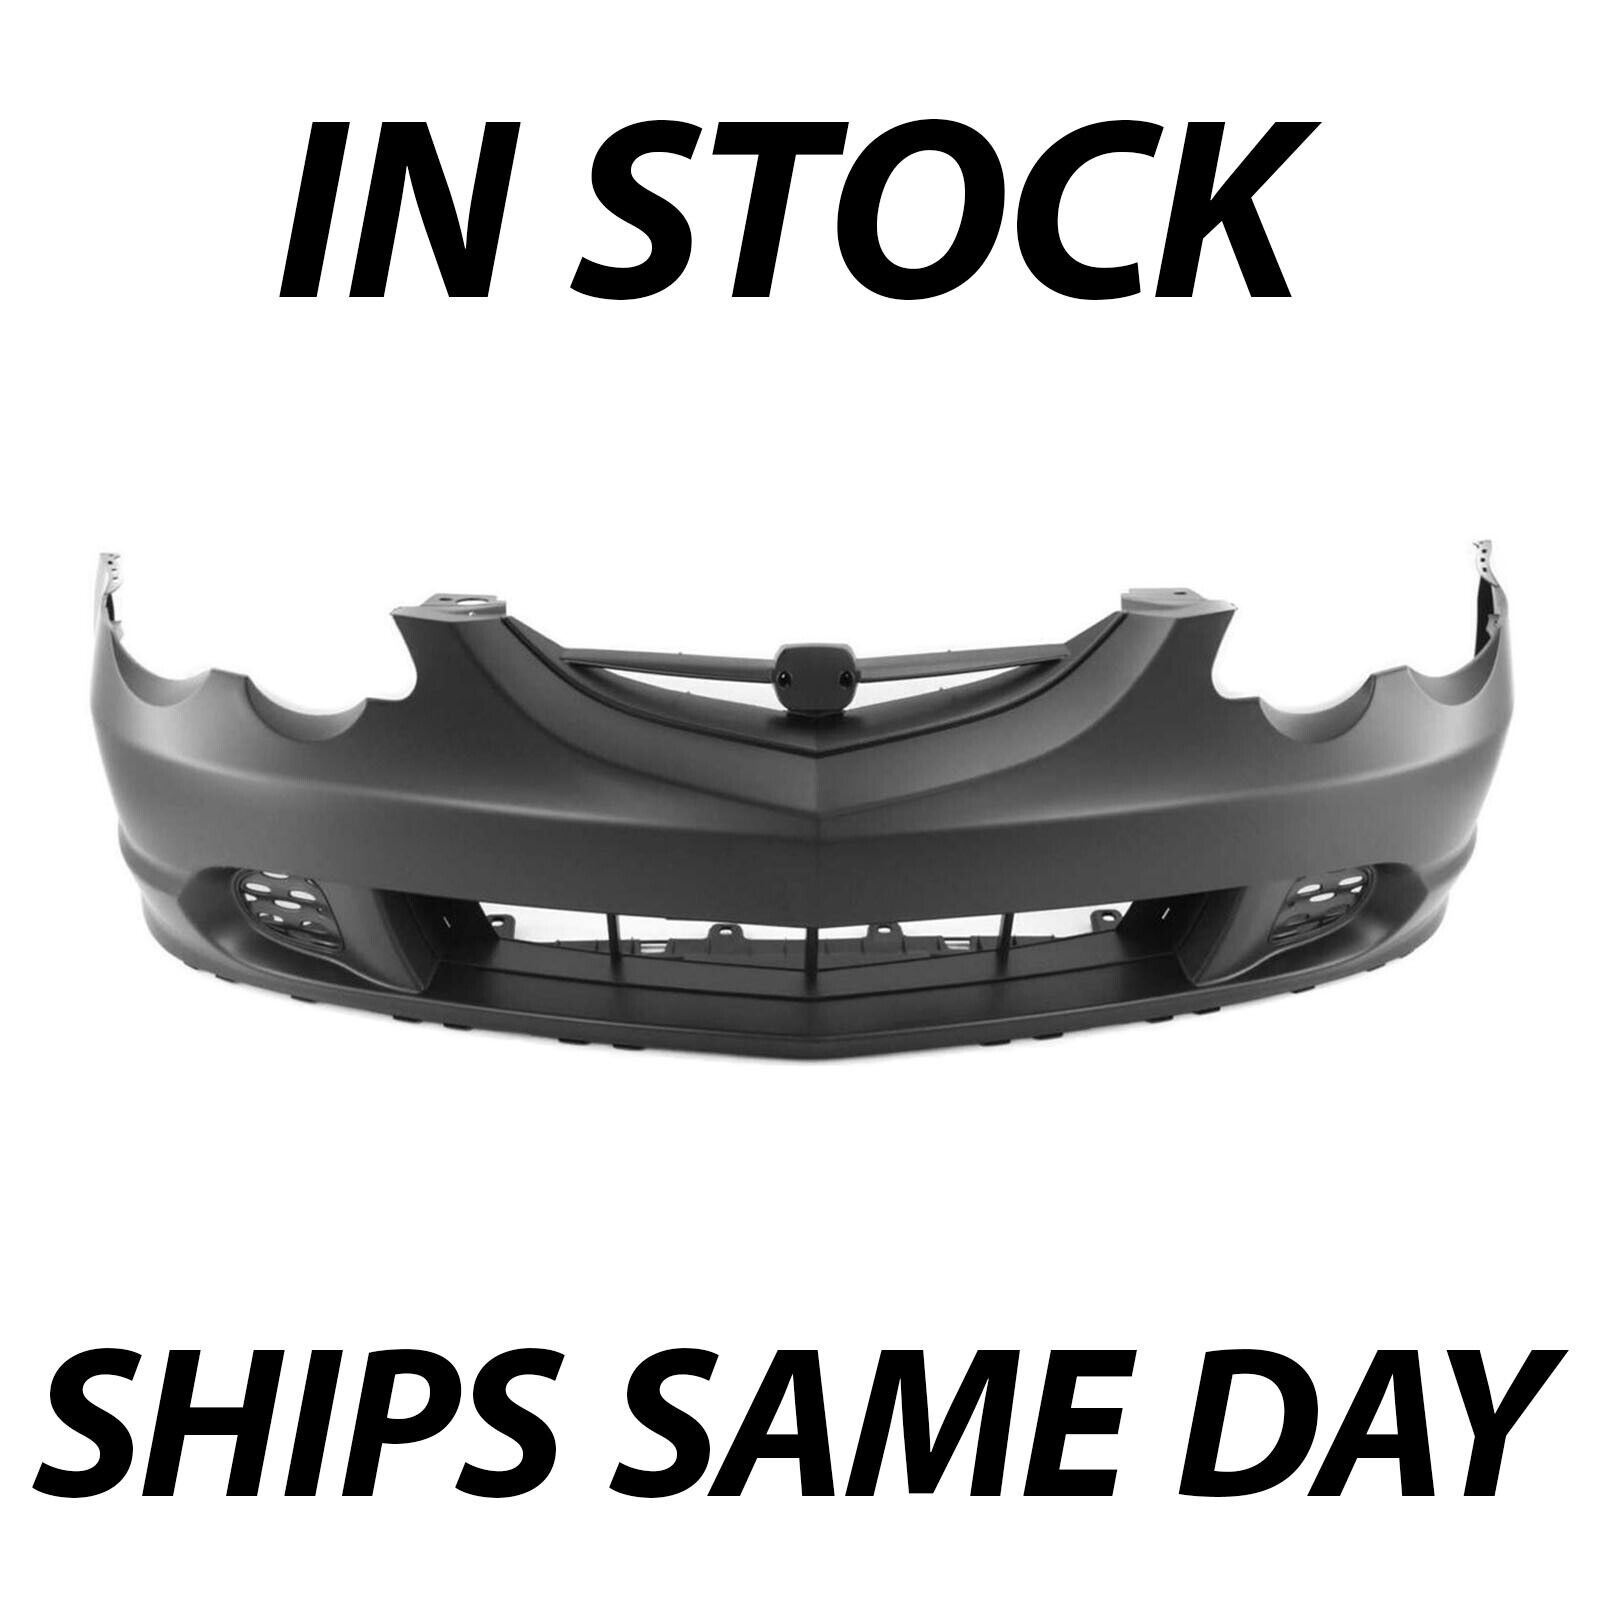 NEW Primered - Front Bumper Cover Replacement for 2002 2003 2004 Acura RSX